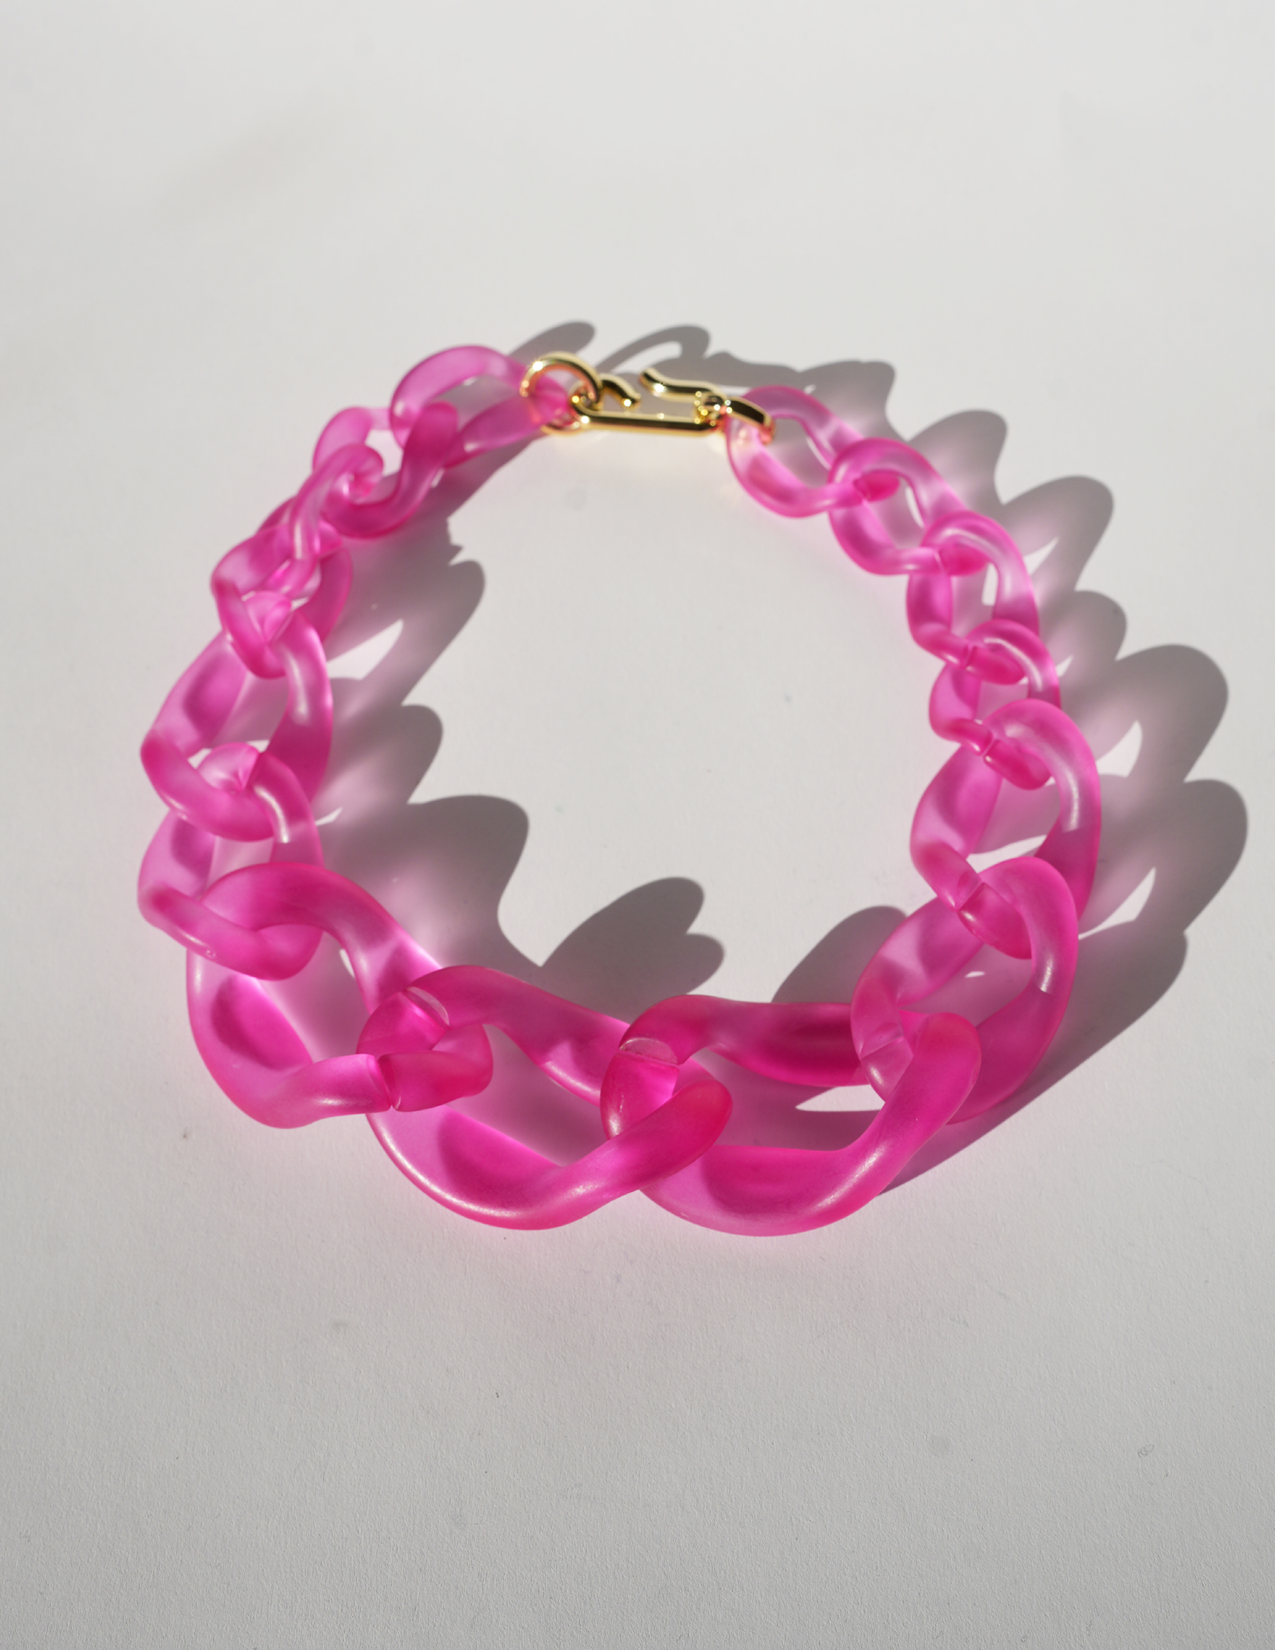 Chunky Chain-Link Necklace